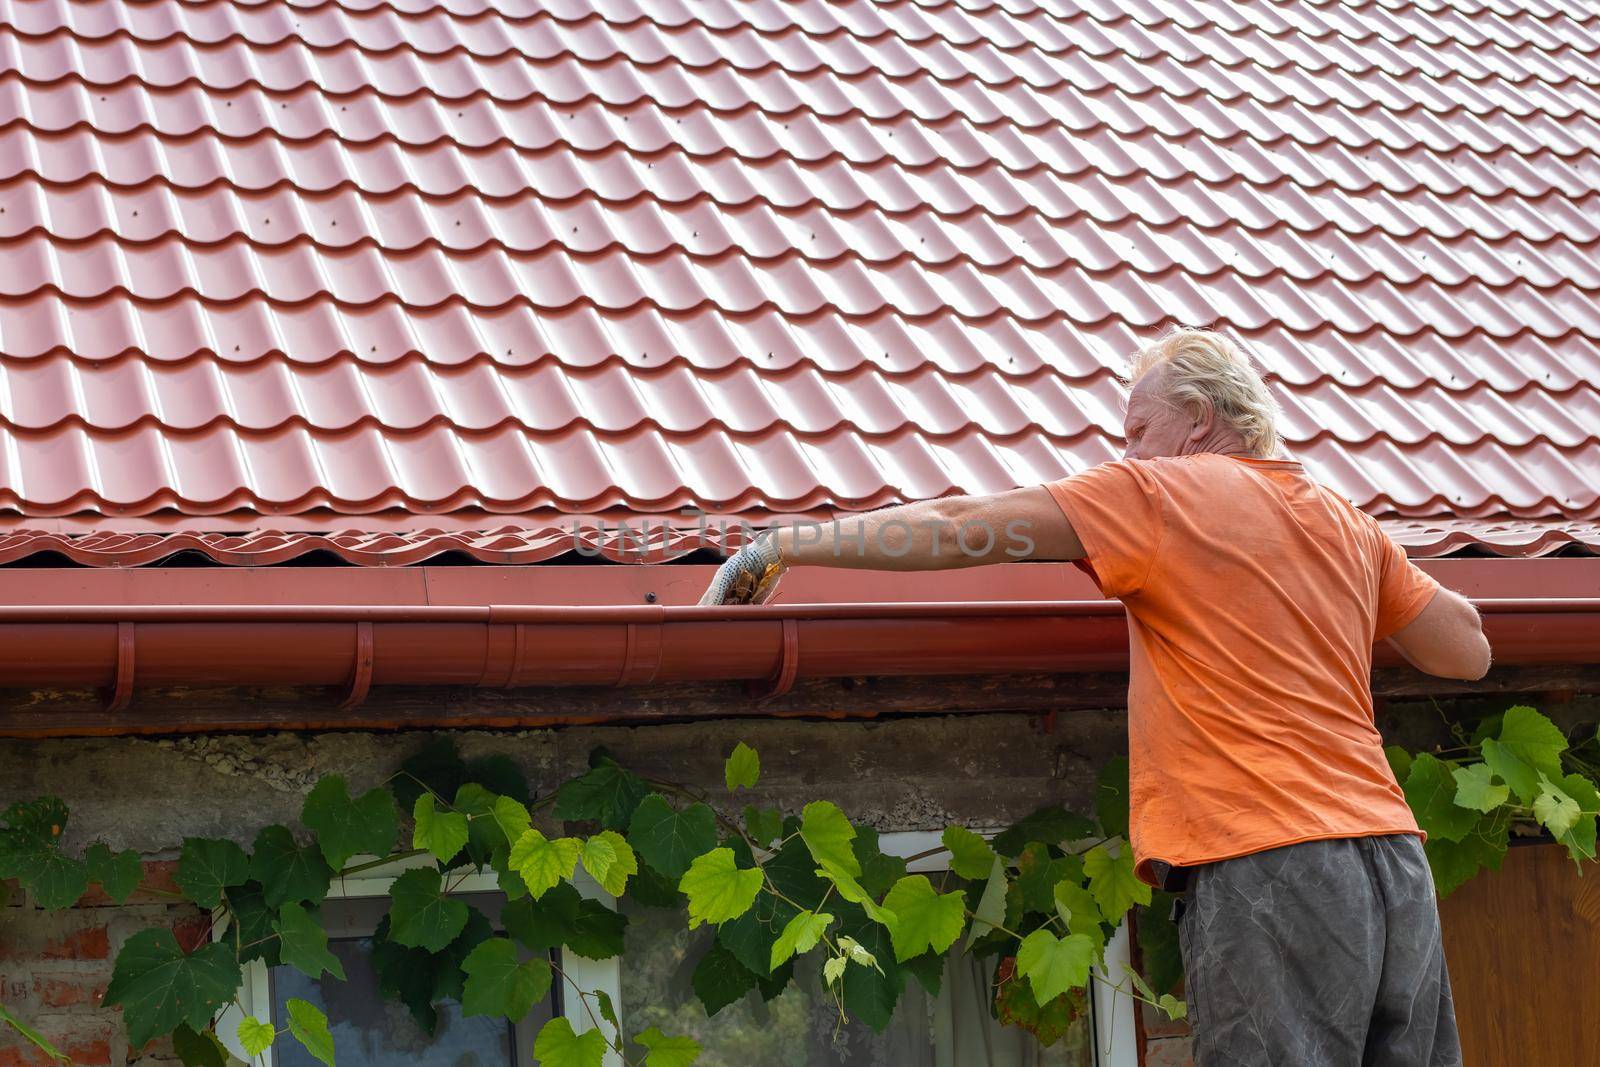 A man cleans out debris and leaves from the gutter system on the roof of his house by levnat09